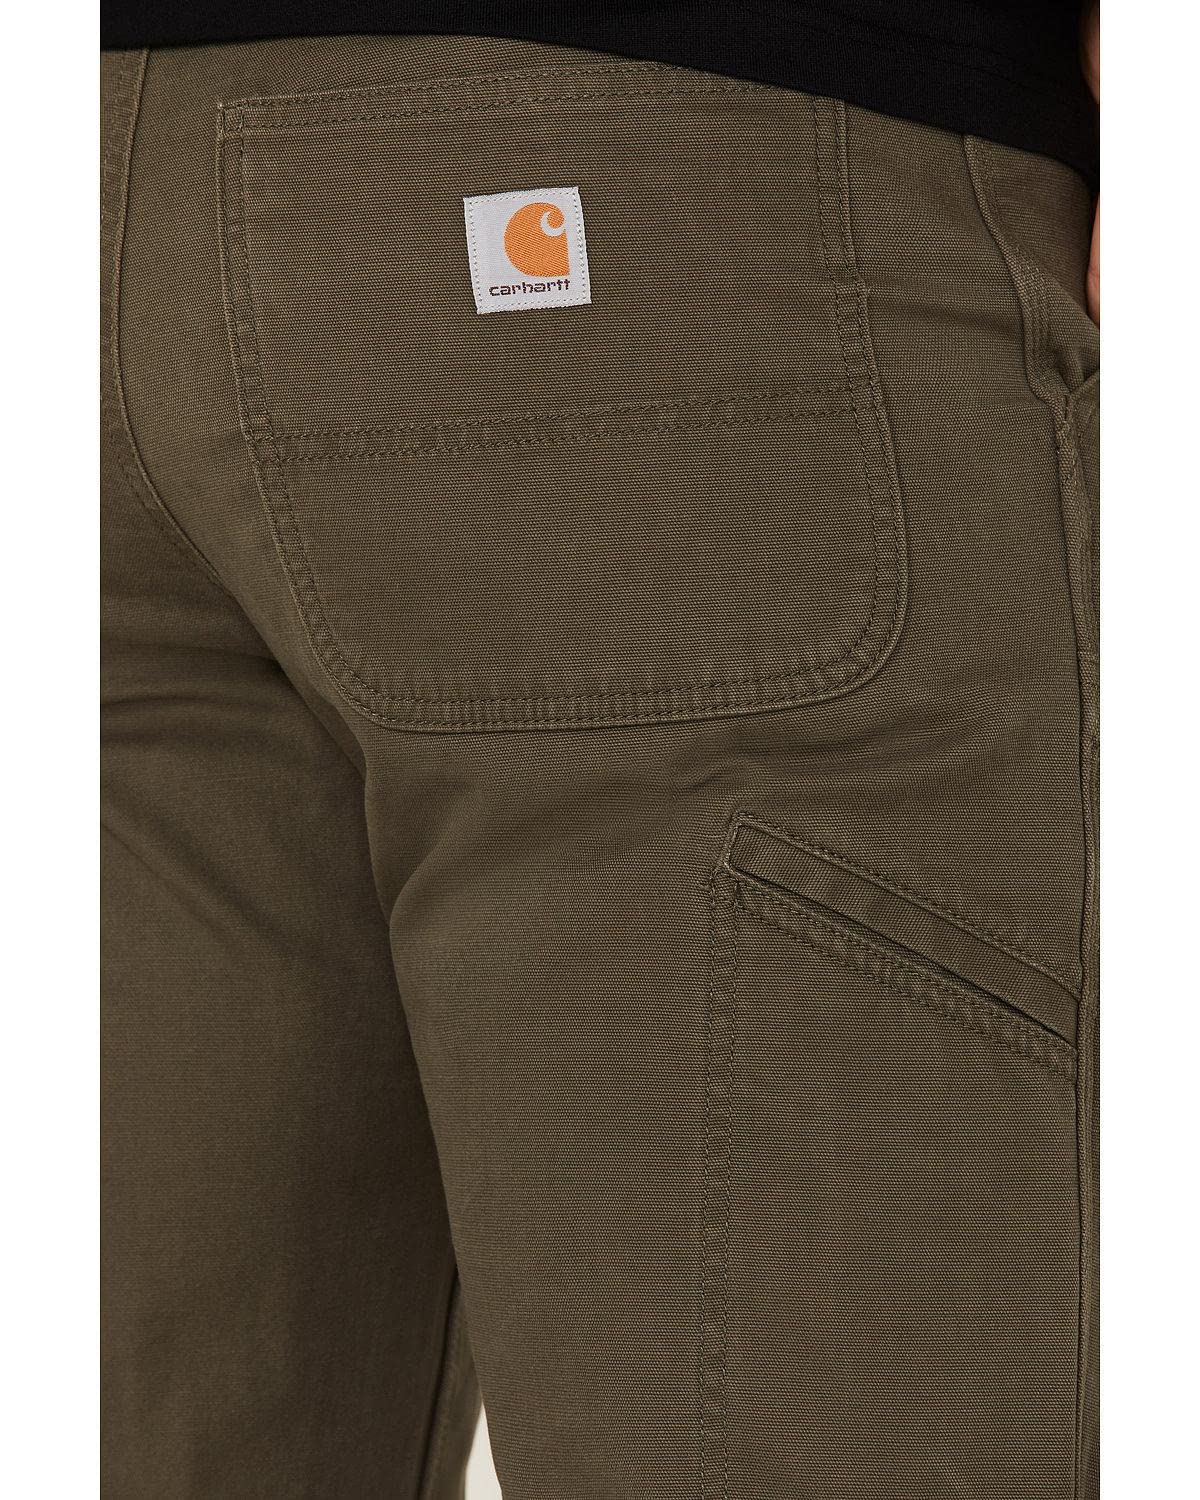 Carhartt Men's Rugged Flex Relaxed Fit Heavyweight Double-Front Utility Logger Jean